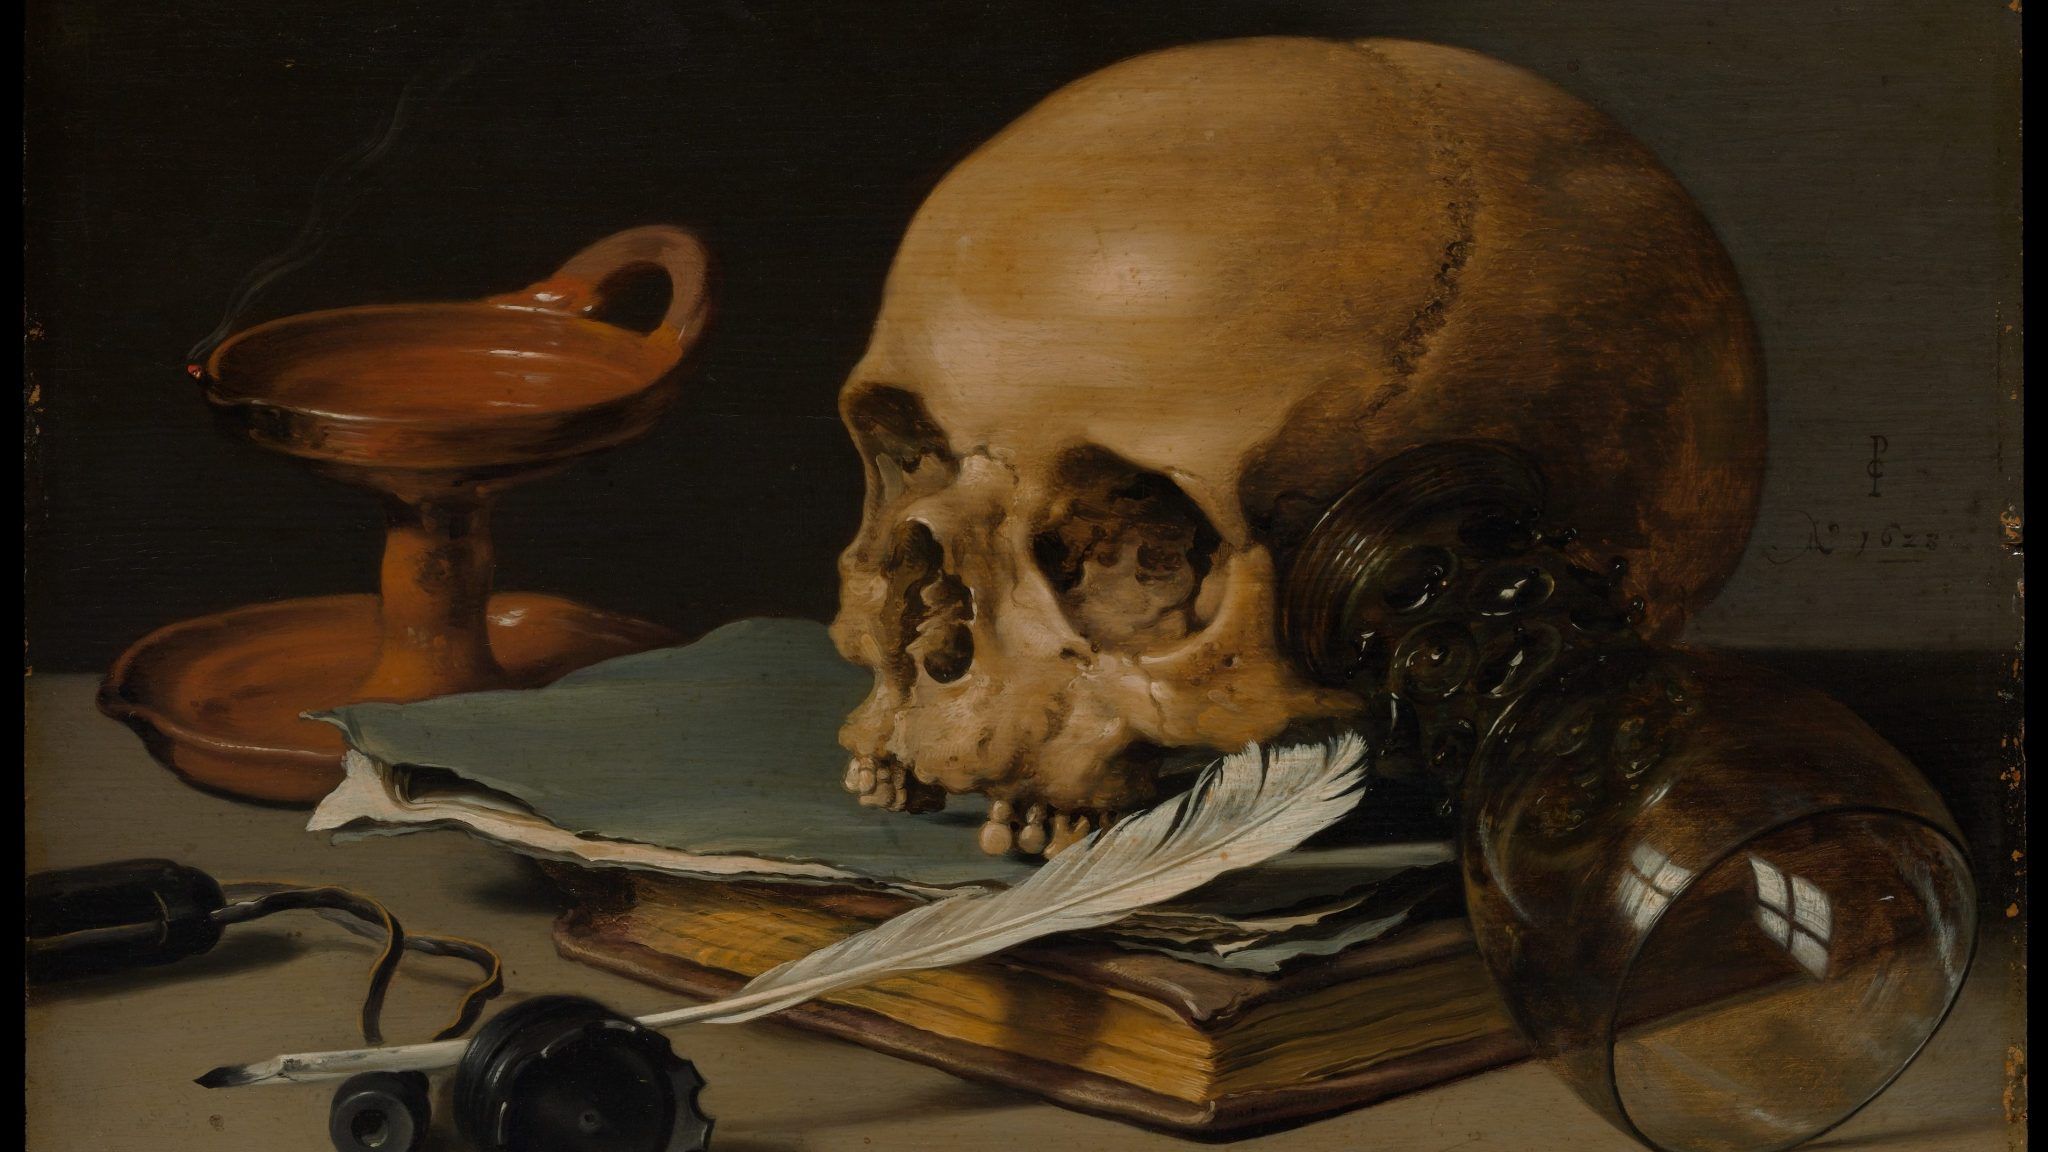 A painting of an old skull and some books - Dark academia